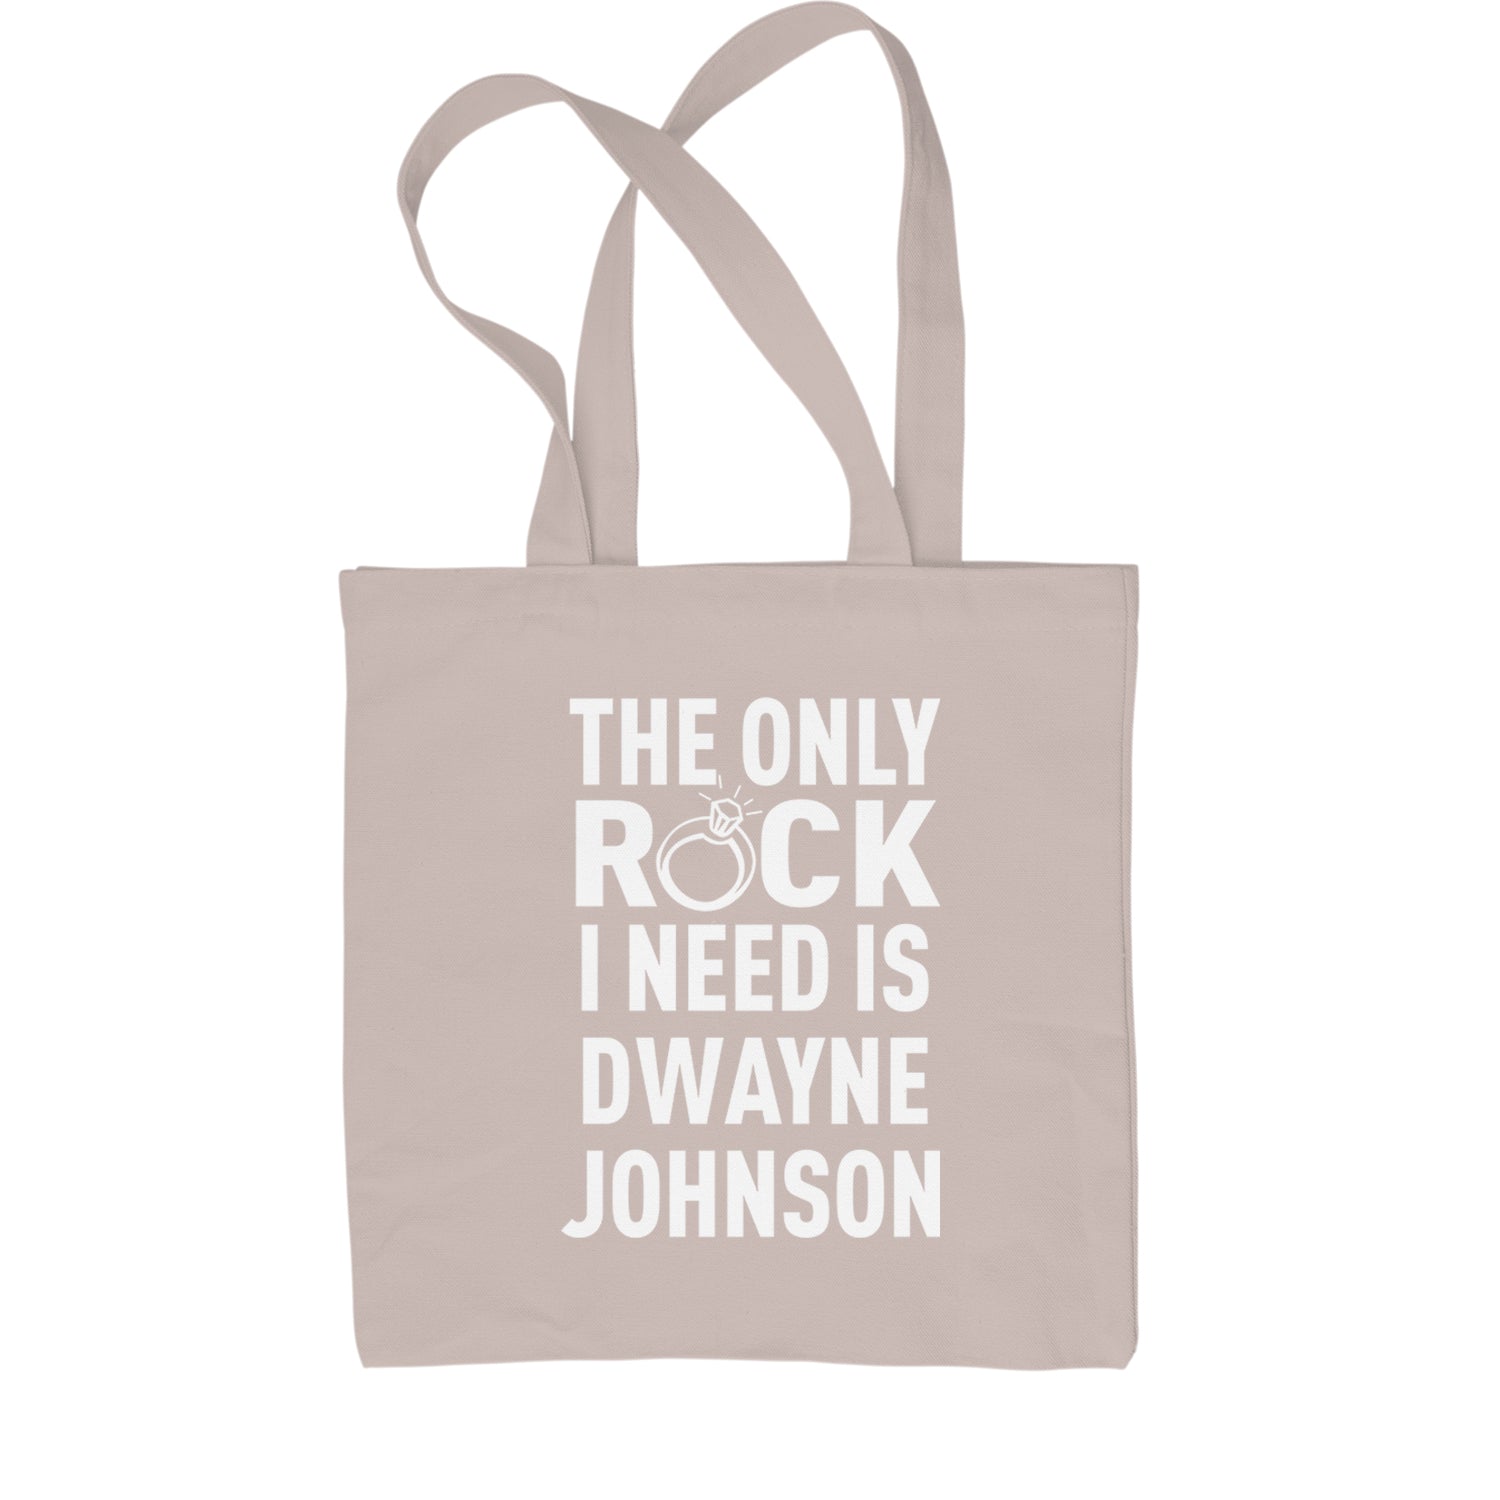 The Only Rock I Need Is Dwayne Johnson Shopping Tote Bag dwayne, johnson, marry, me, ring, rock, the, wedding by Expression Tees